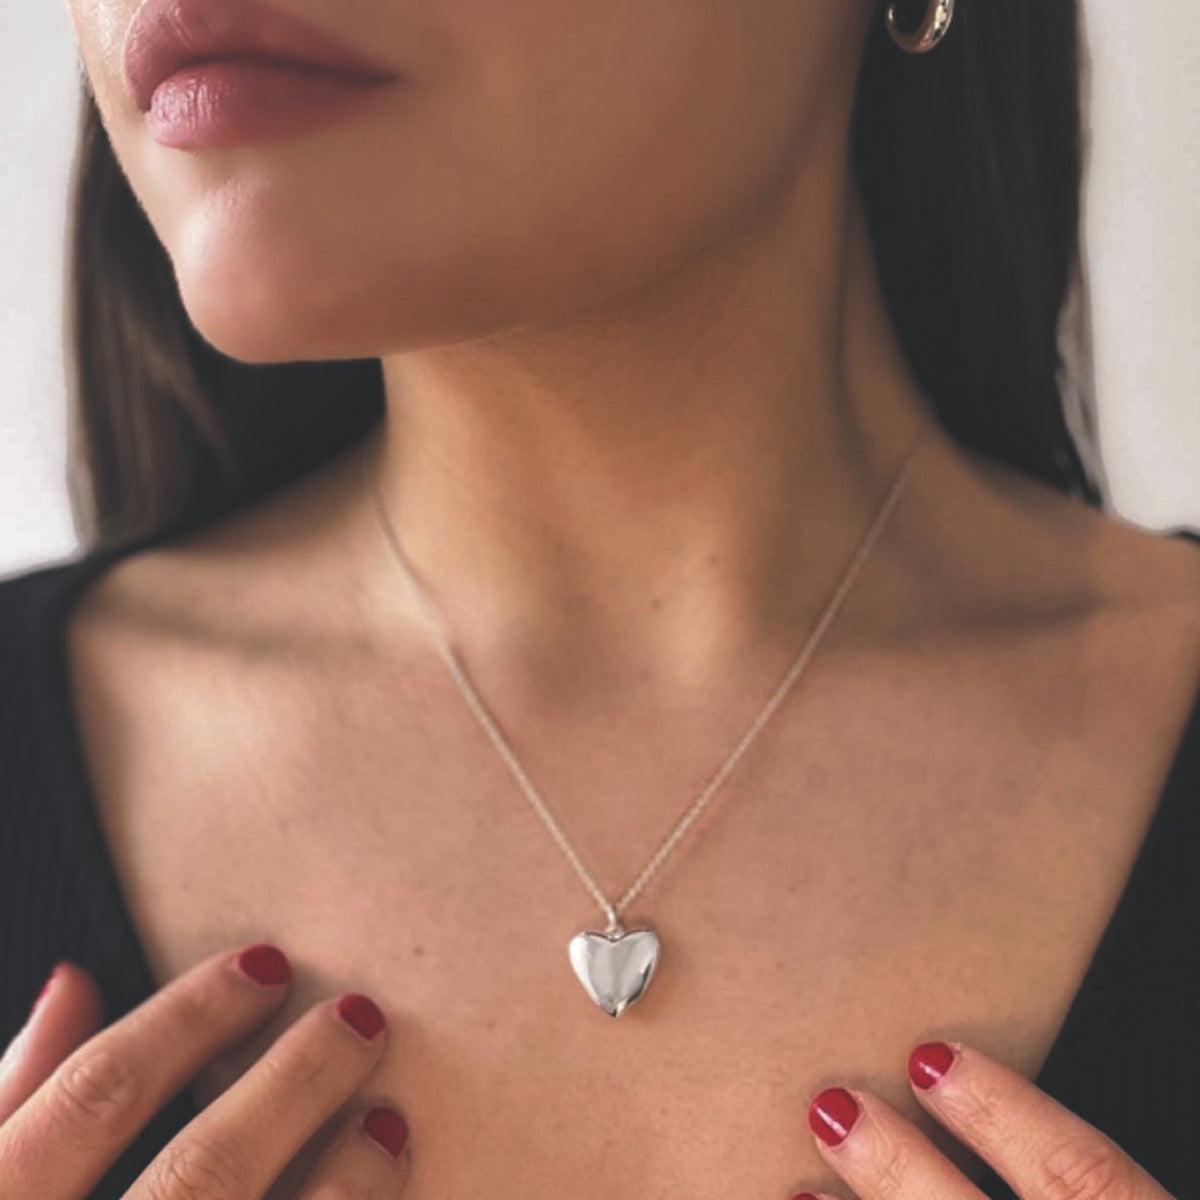 Deluxe Solid Silver Heart Necklace